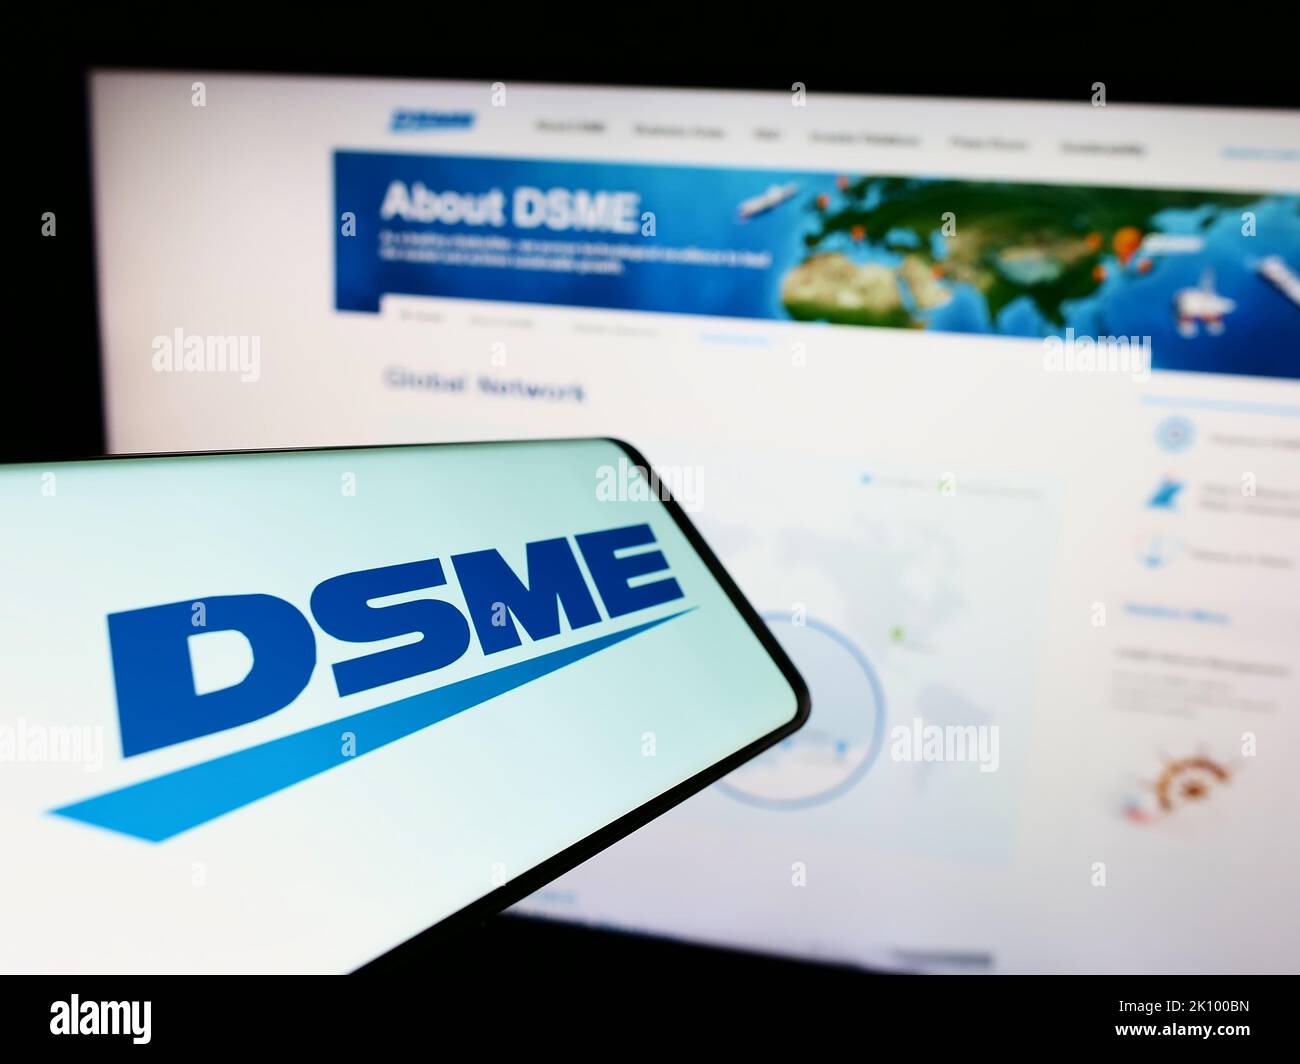 Smartphone with logo of Daewoo Shipbuilding and Marine Engineering (DSME) on screen in front of website. Focus on center-right of phone display. Stock Photo